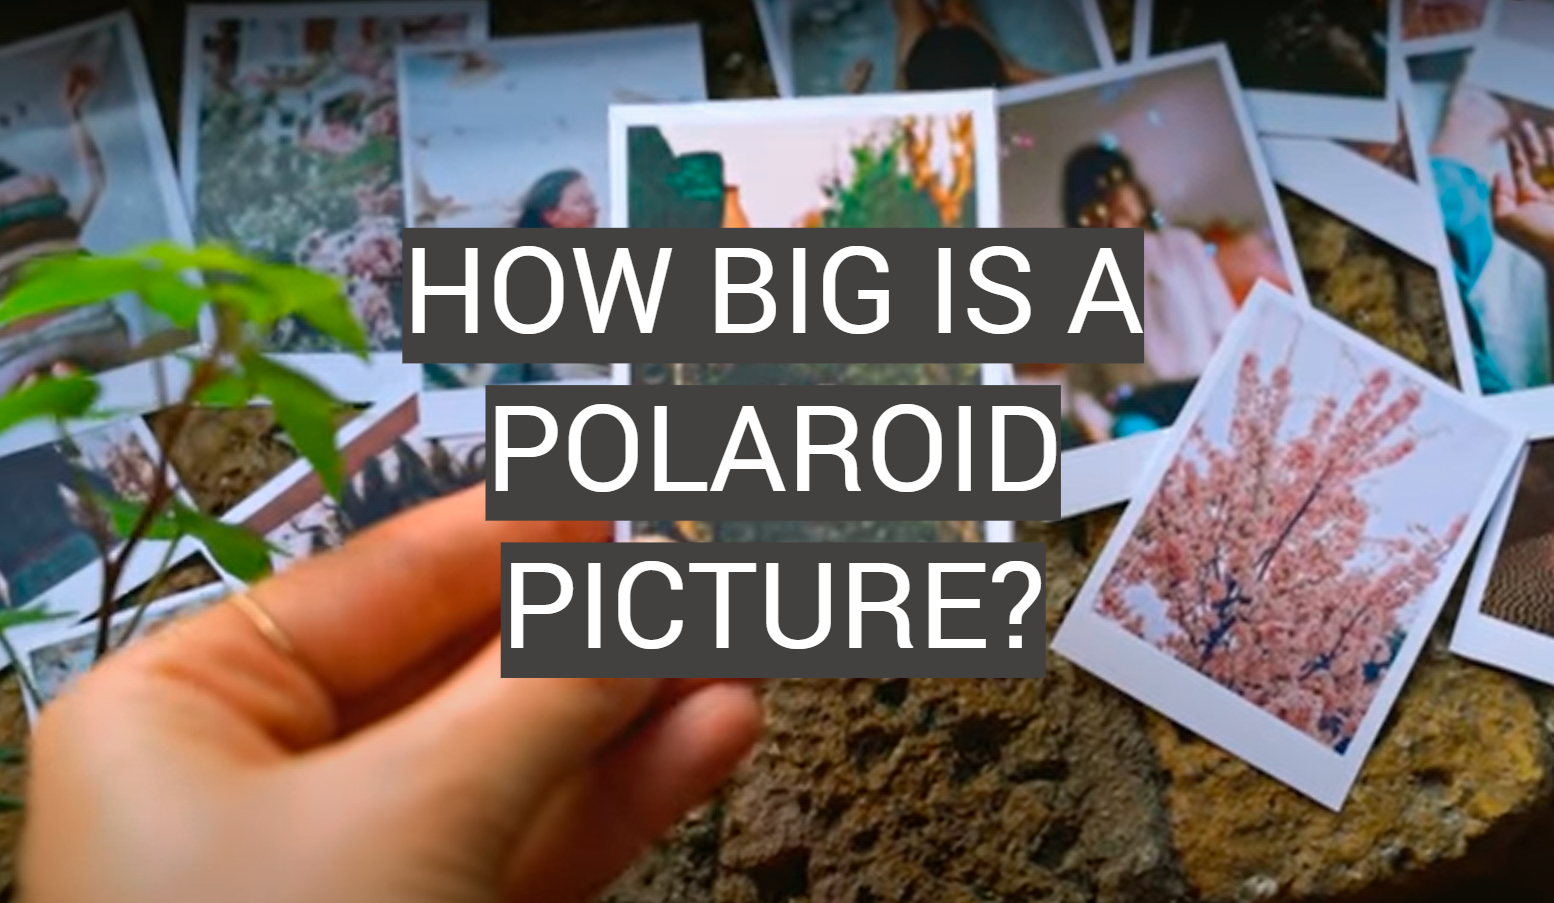 How Big Is a Polaroid Picture?